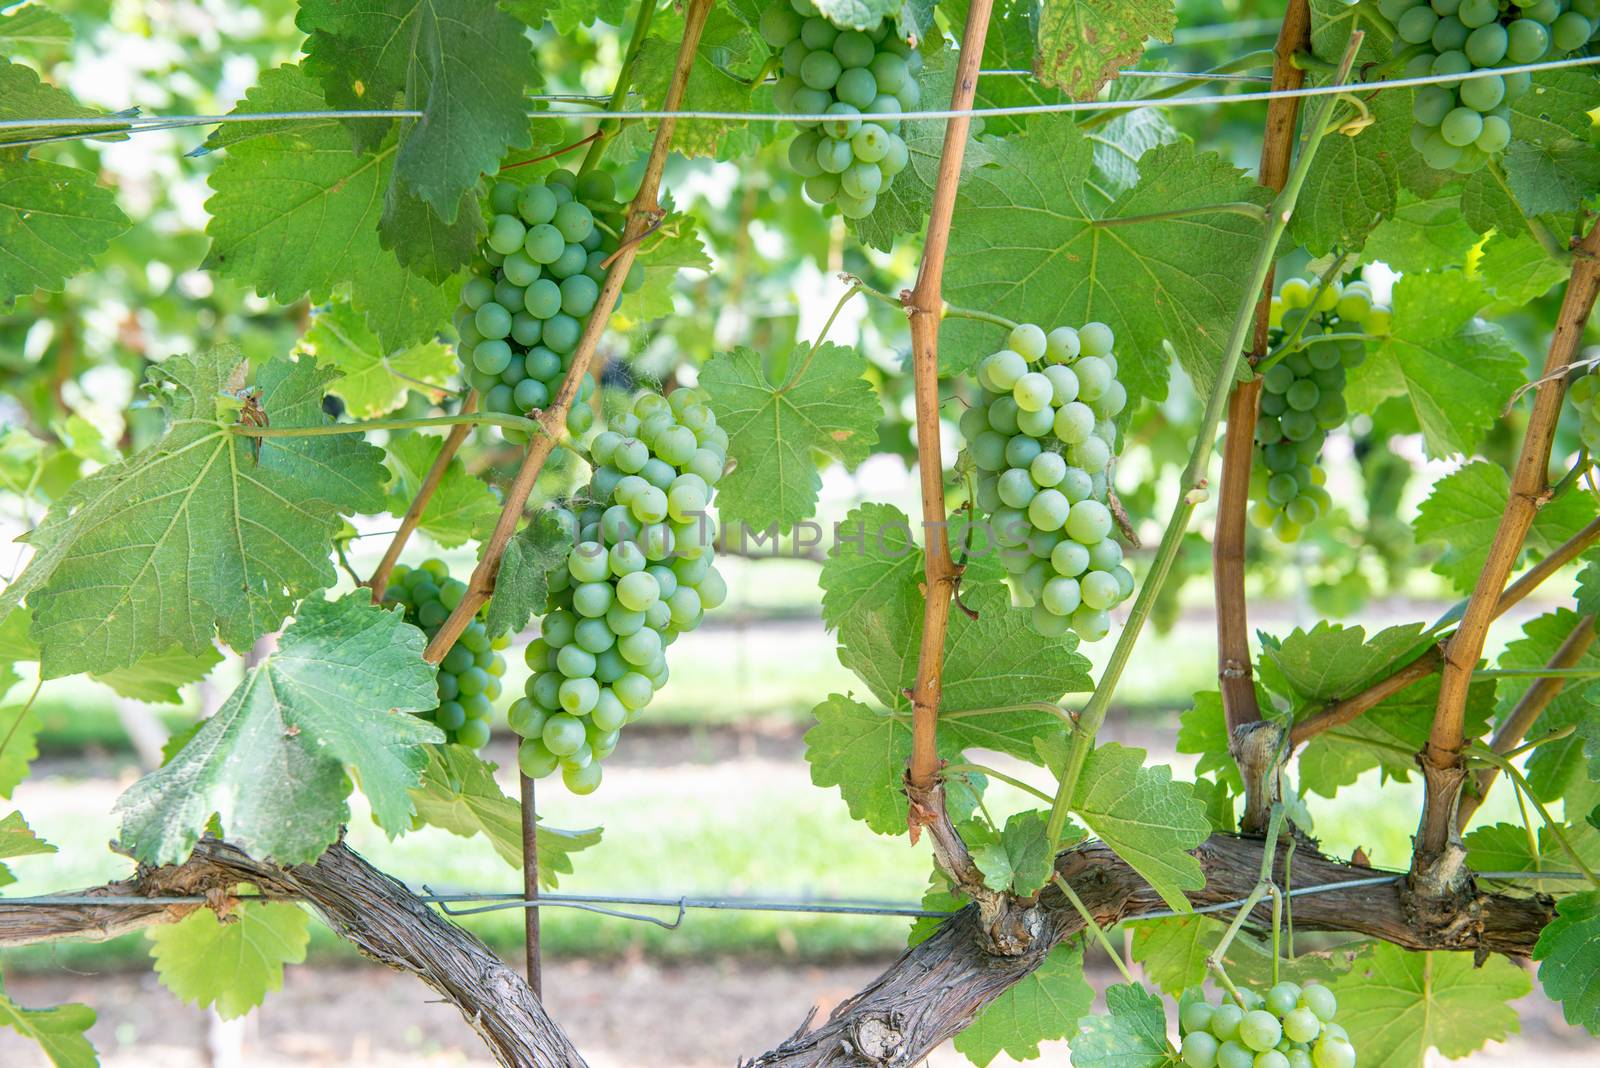 Bunches of green grapes on the vine in Solvang, California